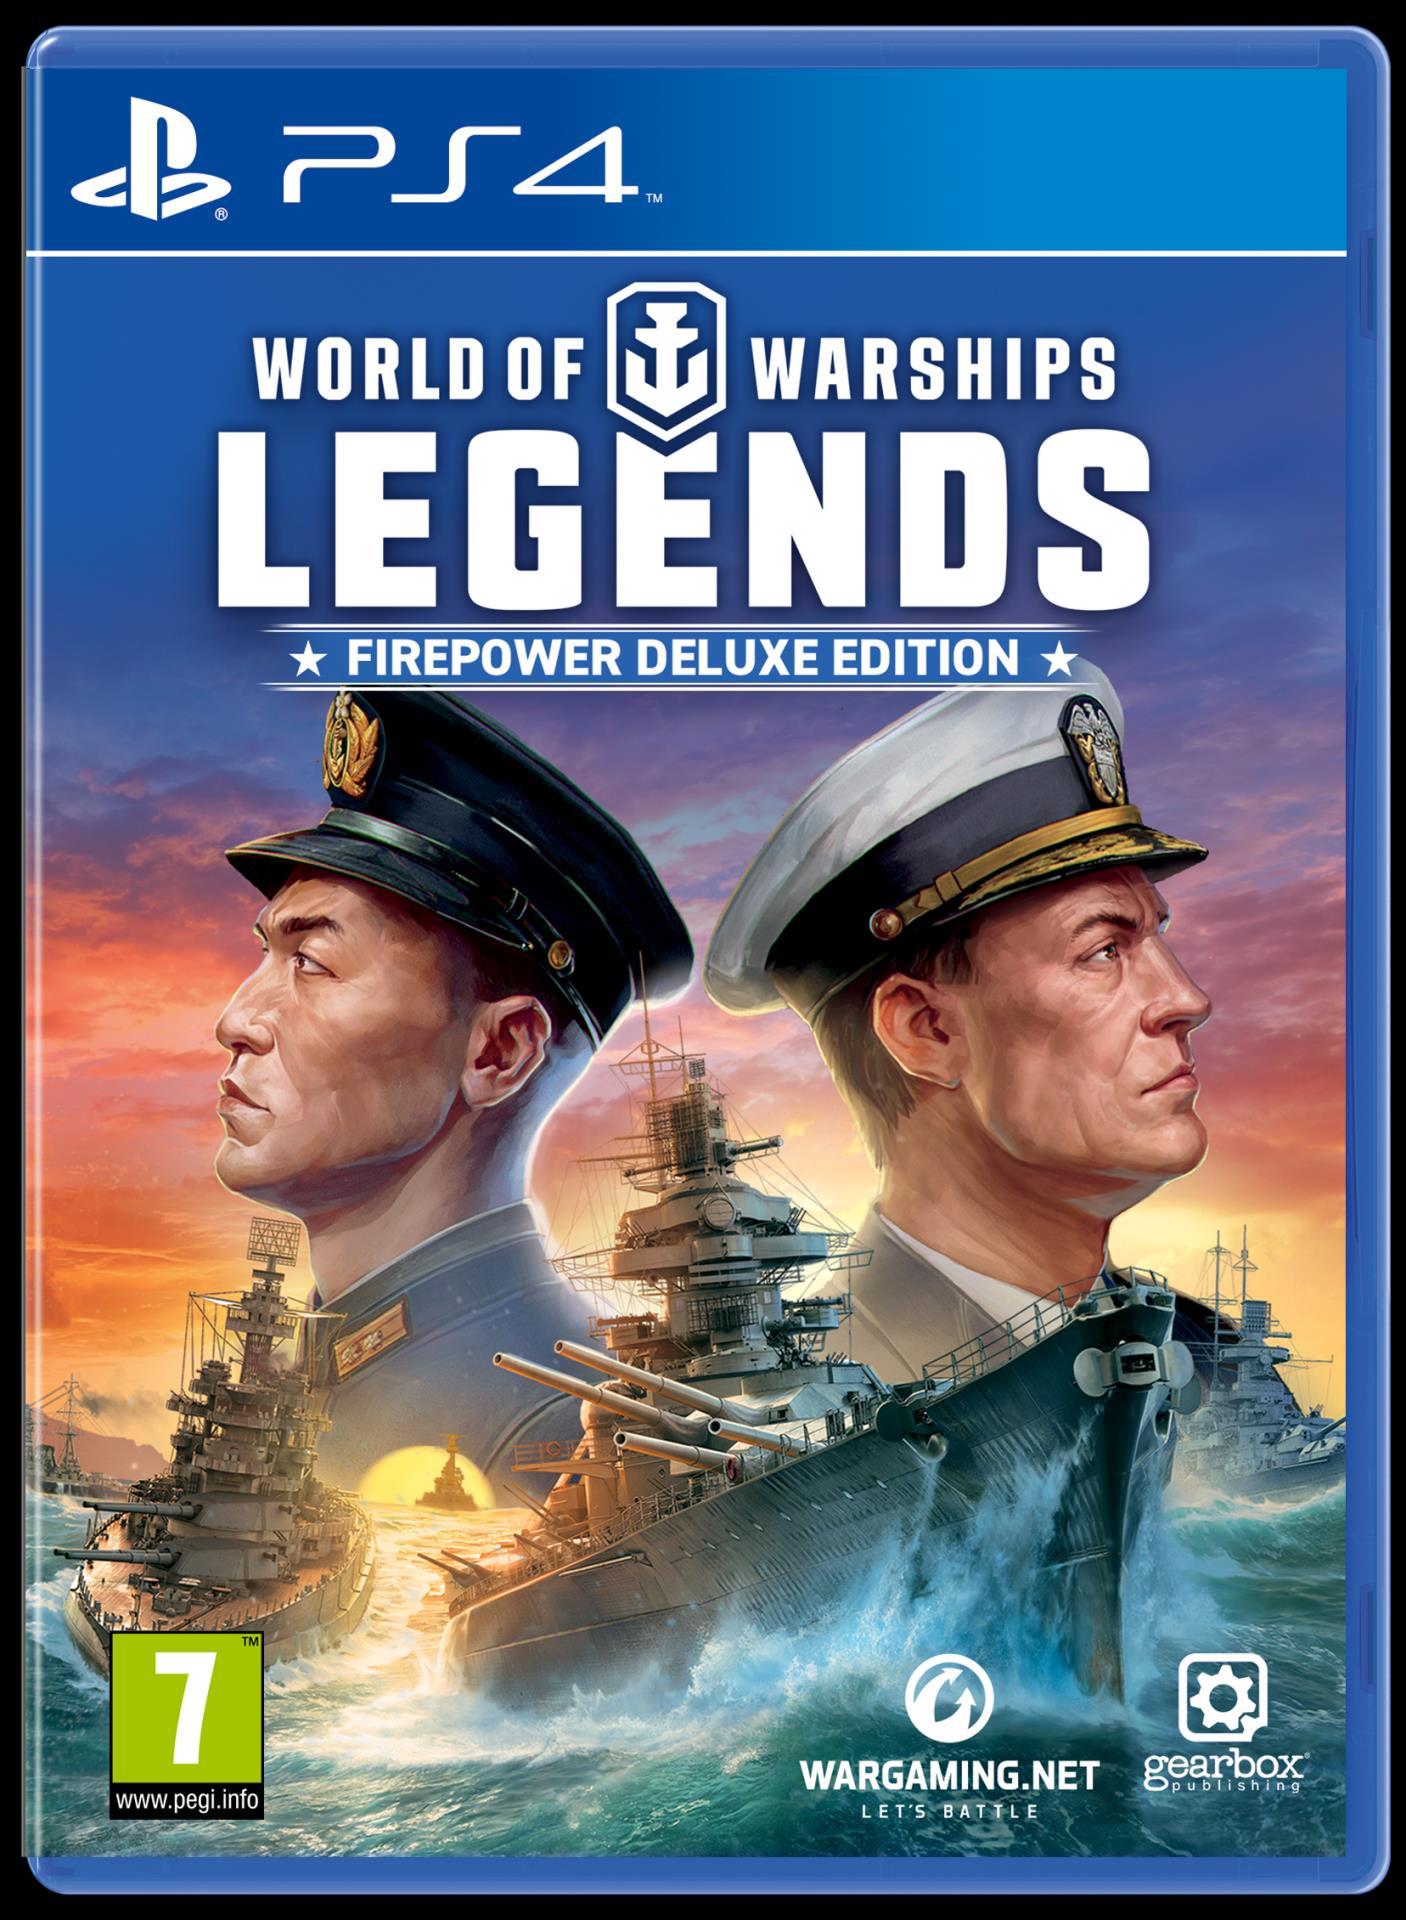 World of Warships : Legends - Firepower Deluxe Edition